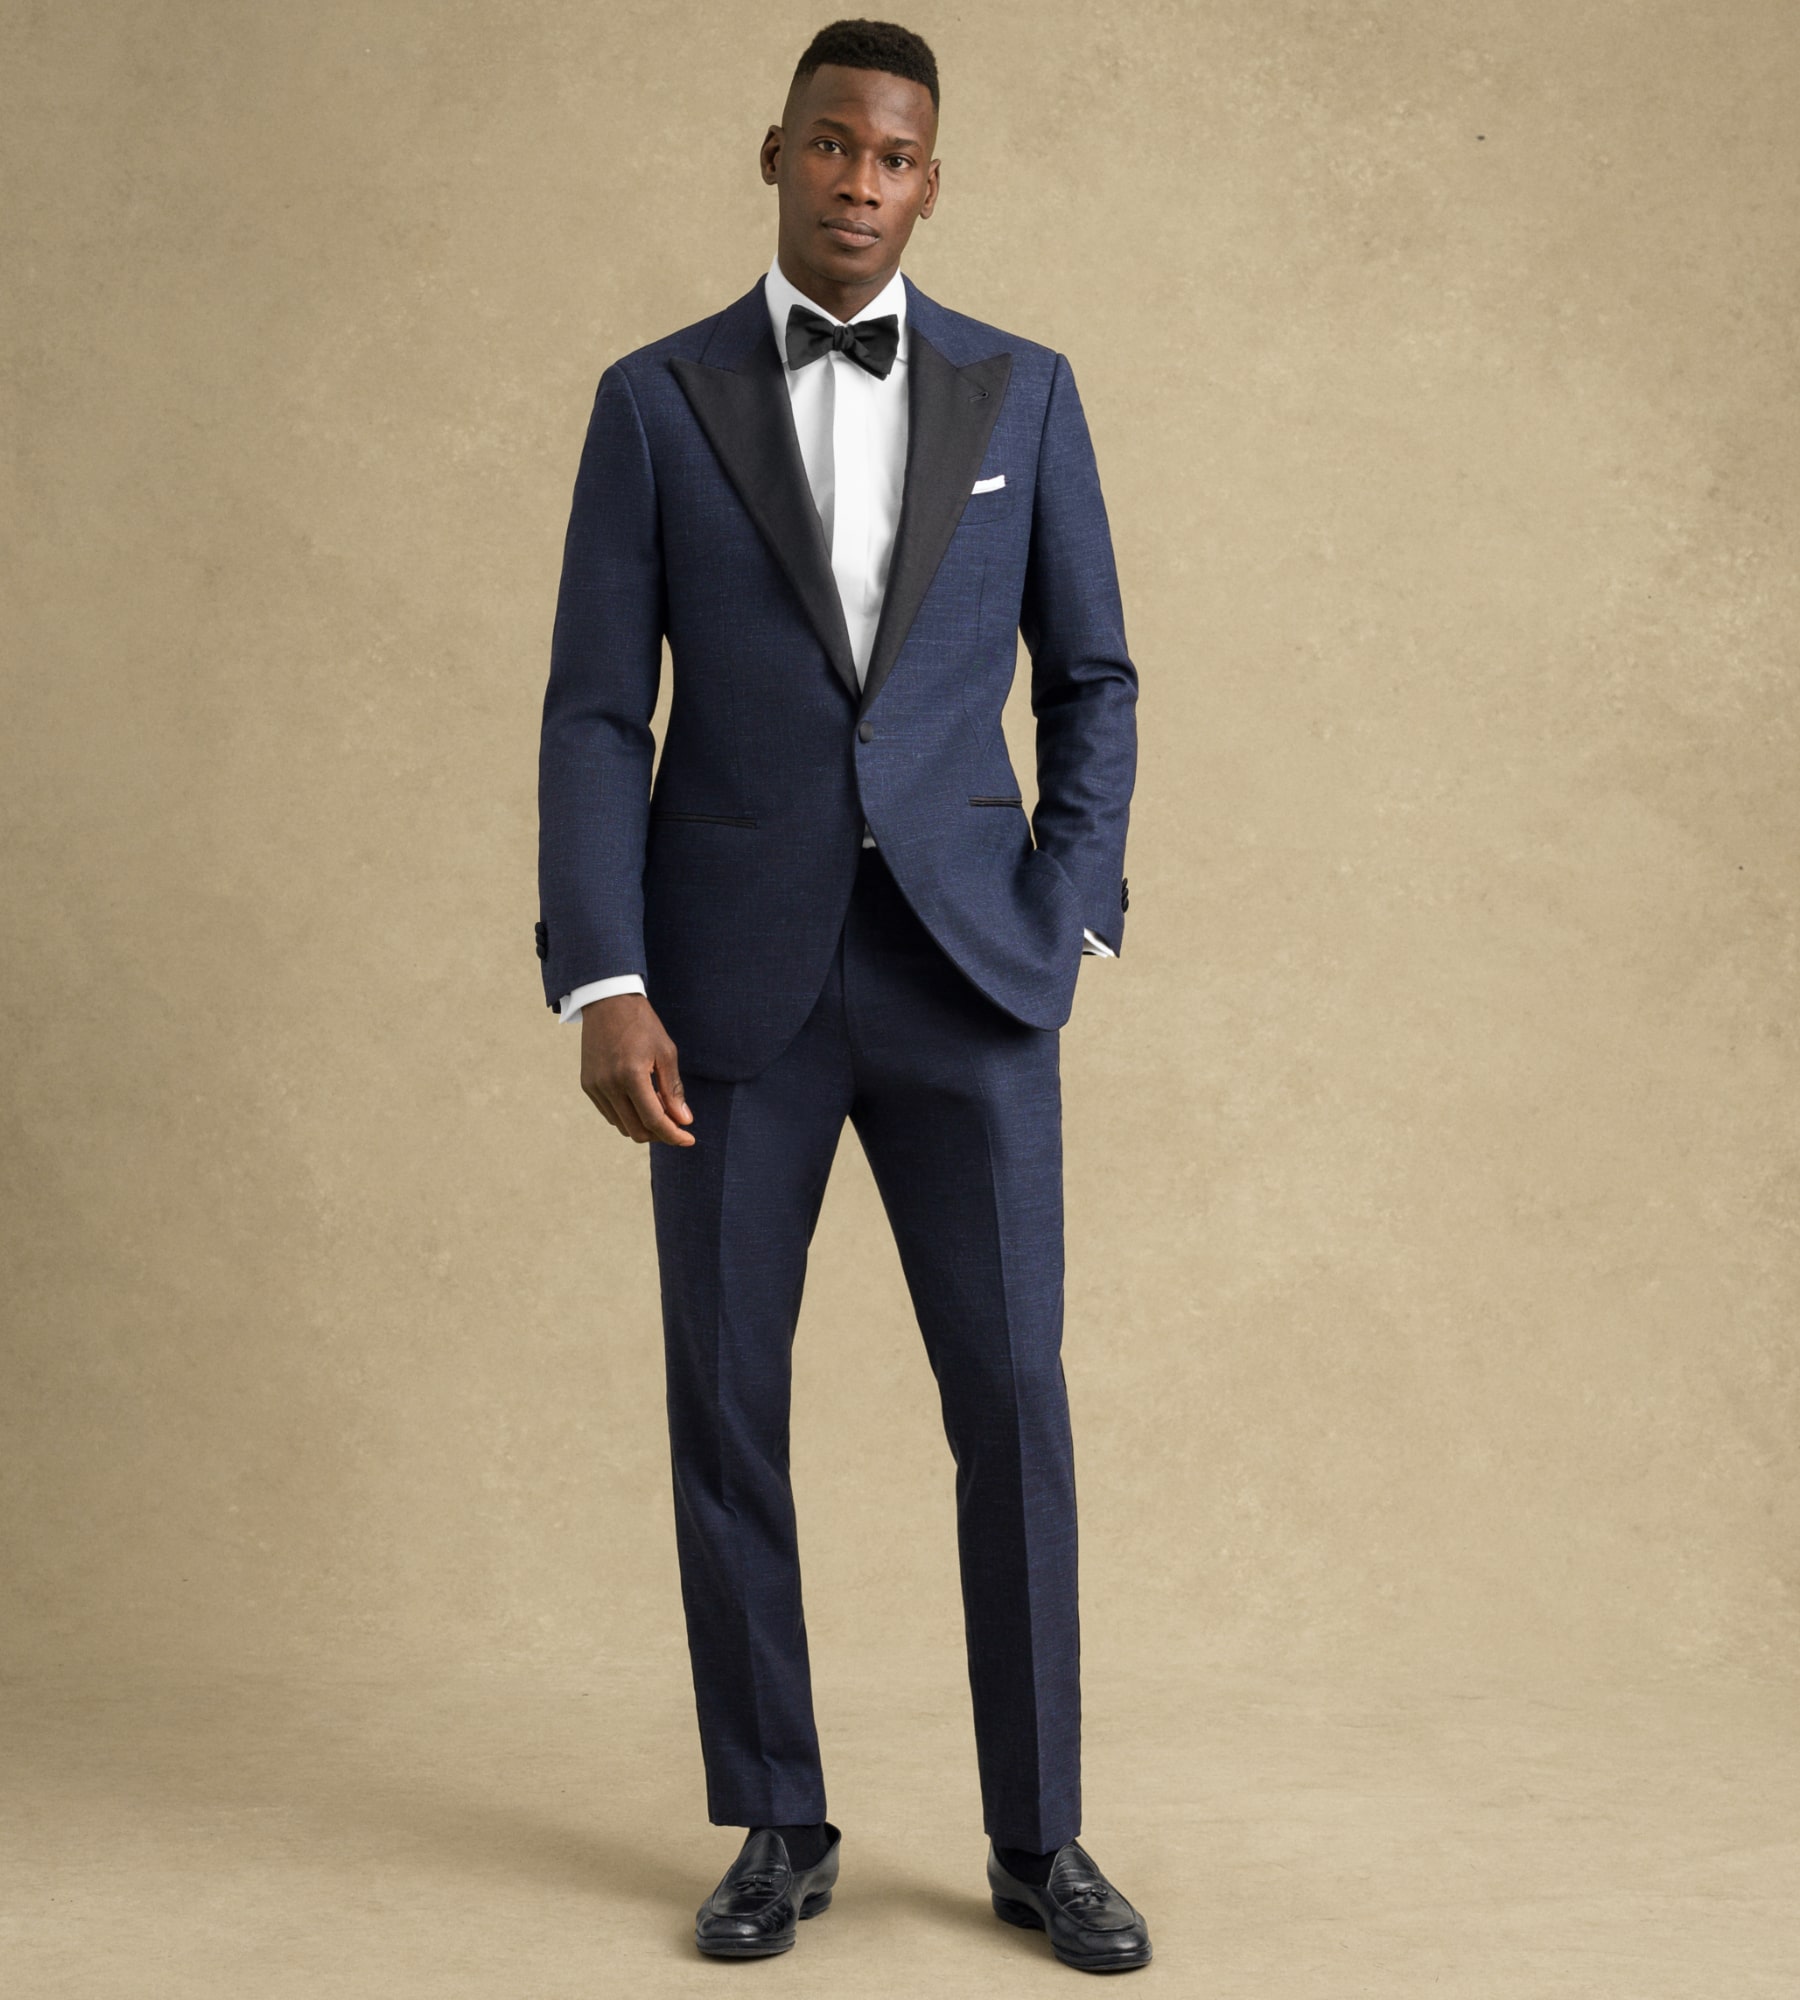 Wedding Guest Attire: Complete Guide On What To Wear